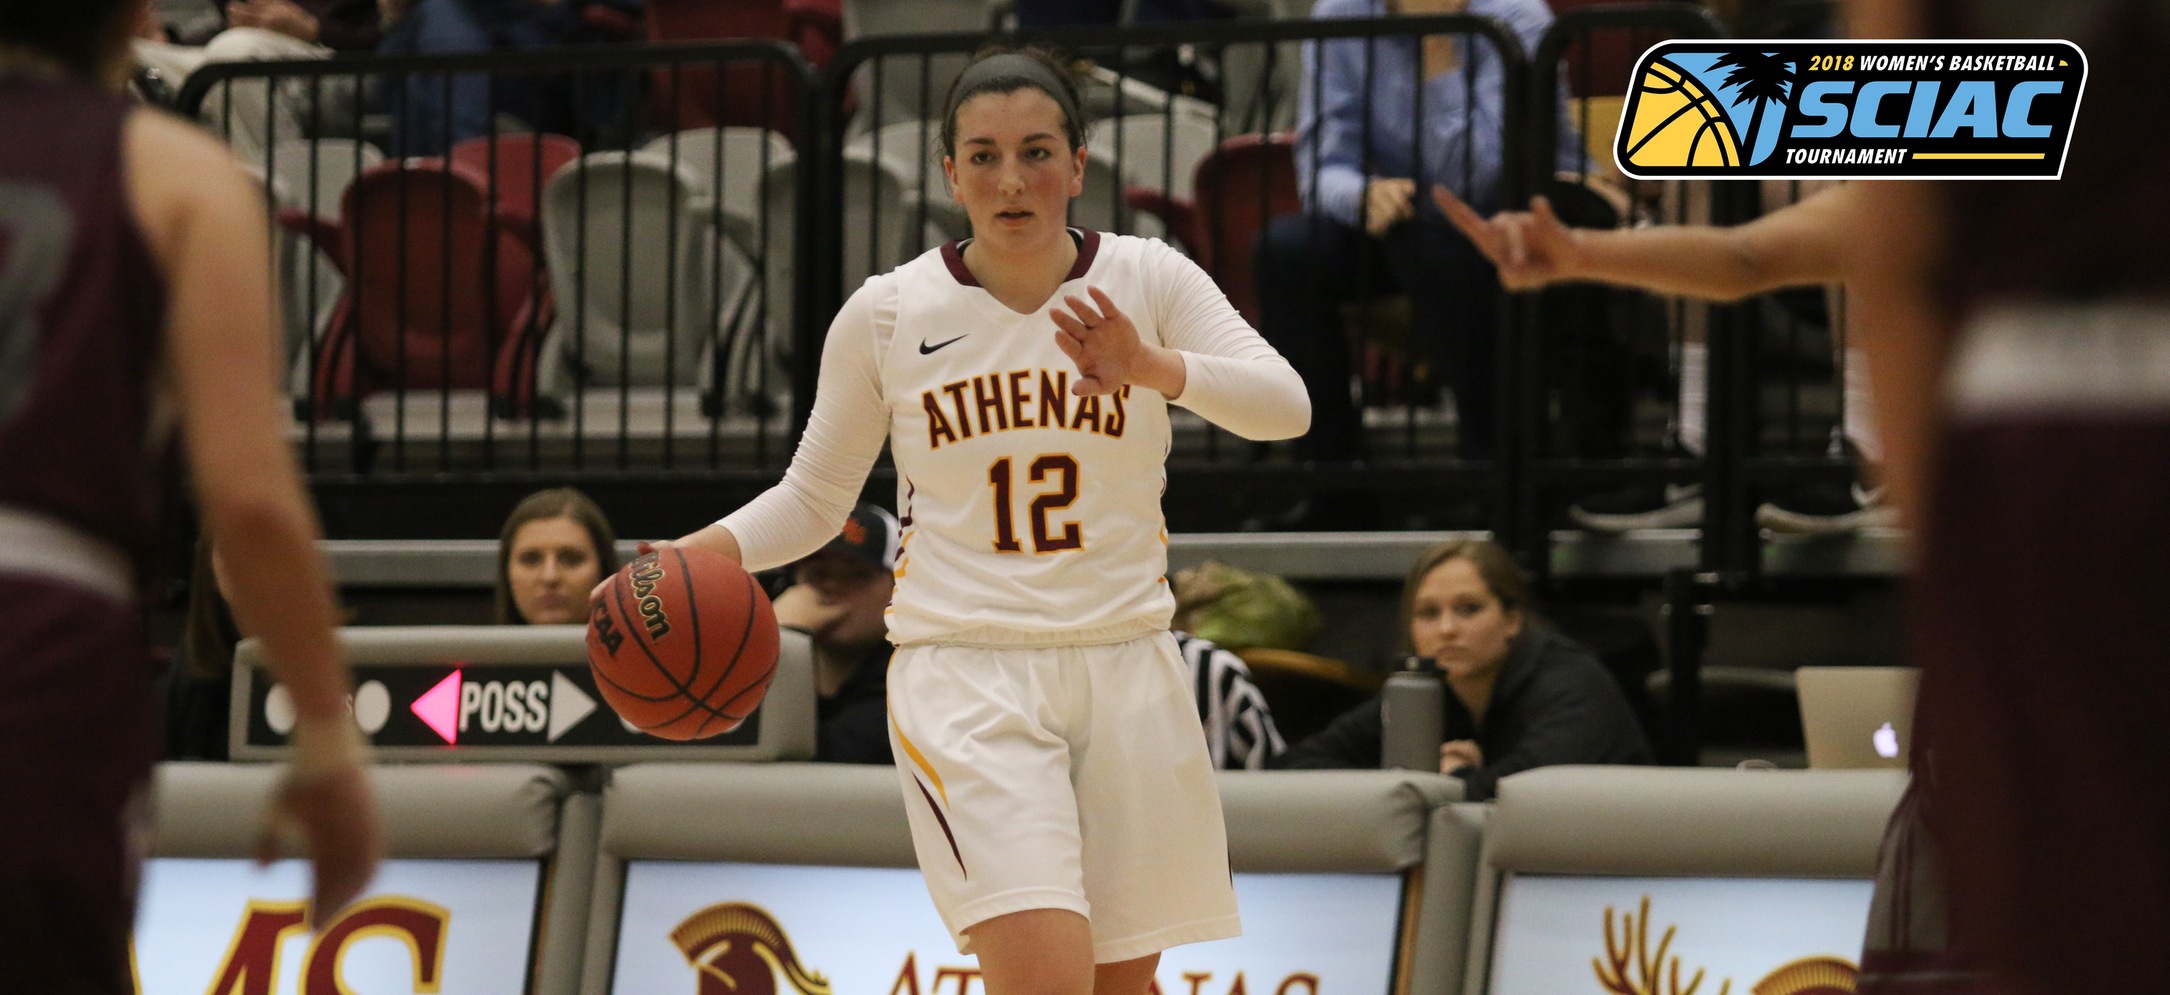 Athenas Outlast Redlands, Advance to Fifth-Straight SCIAC Championship Game